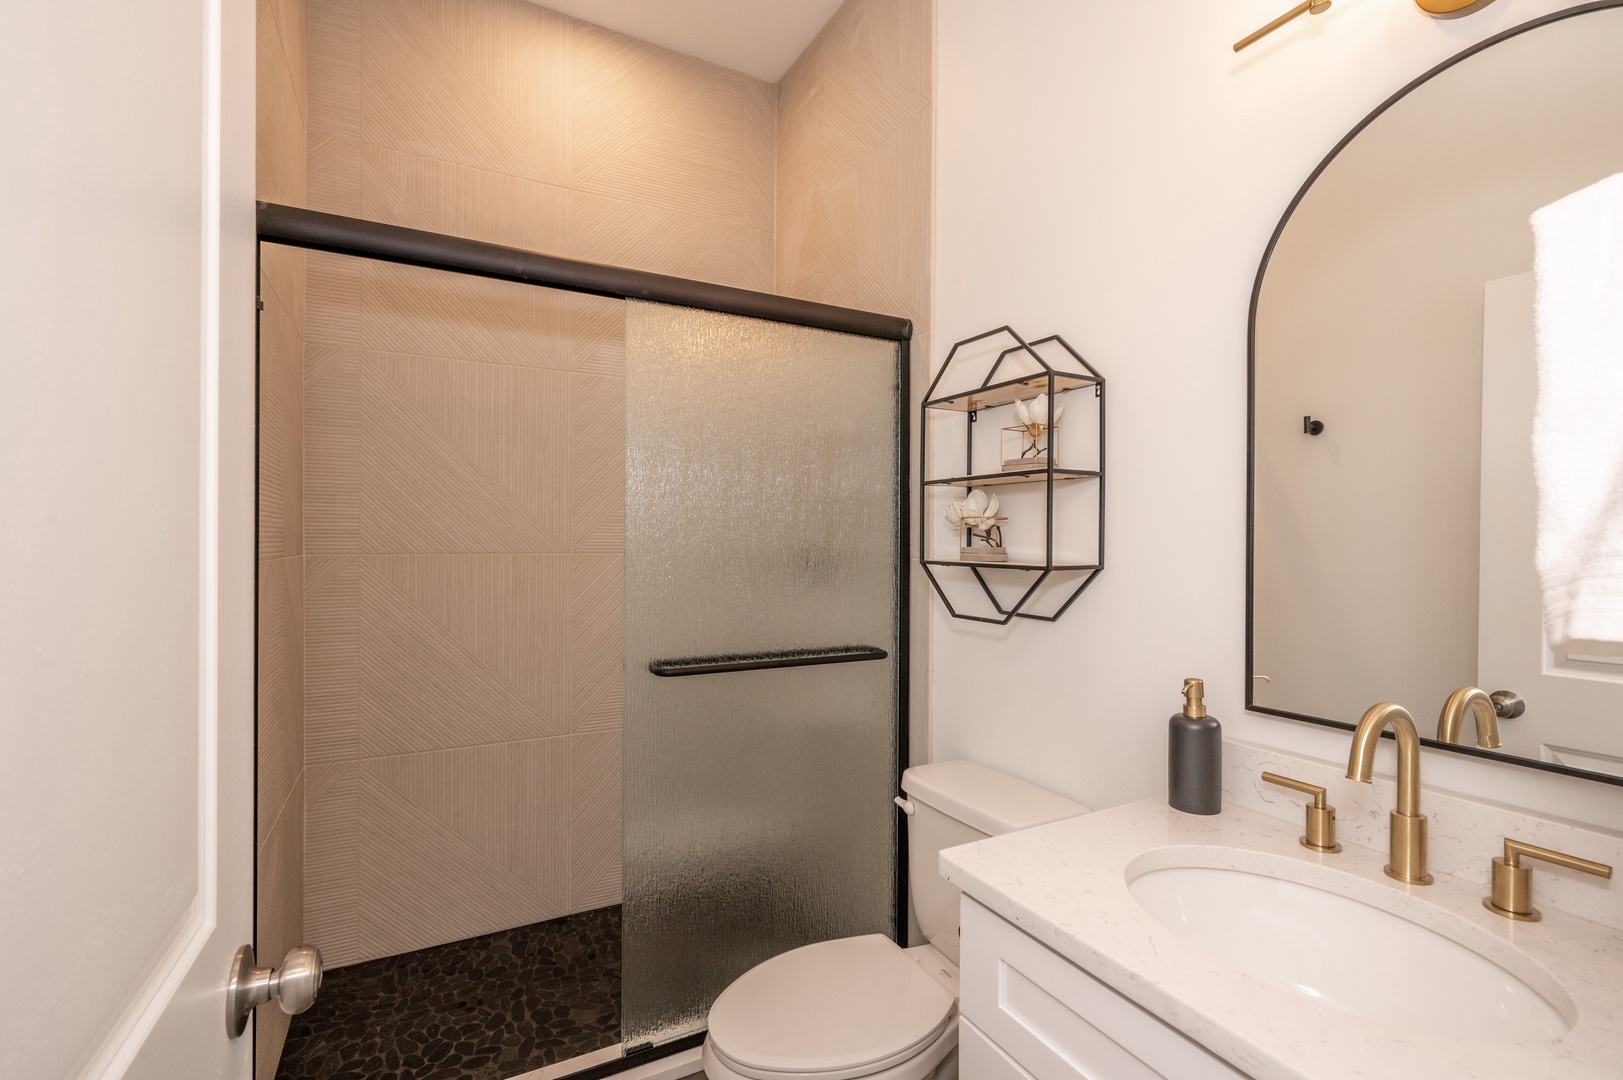 The bathroom offers a chic single vanity and spa-like glass shower